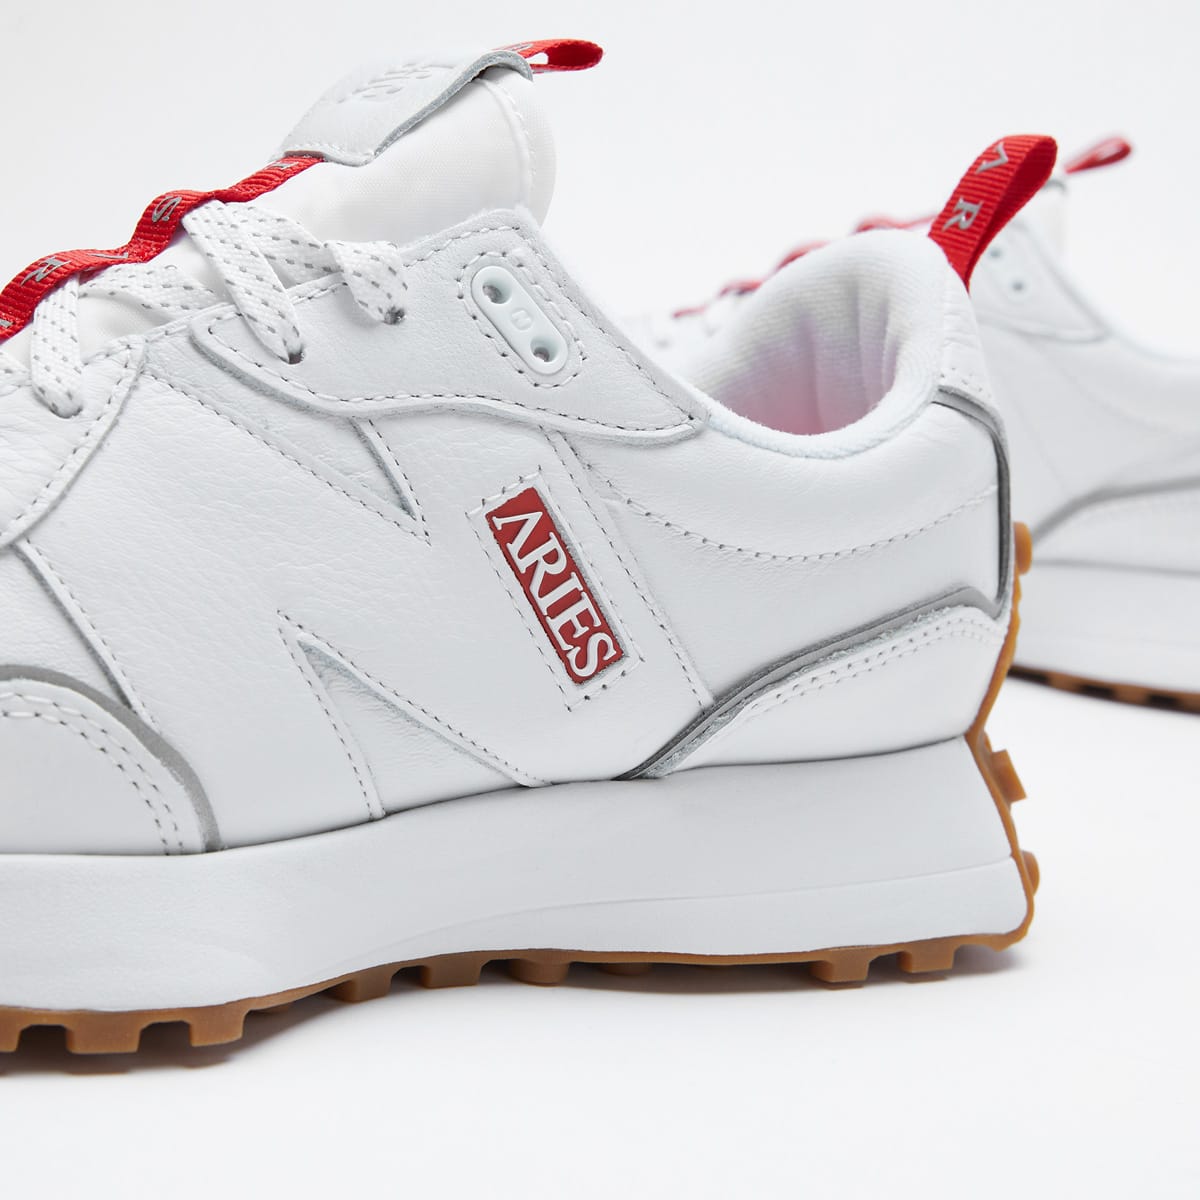 New Balance x Aries MS327 (White) | END. Launches